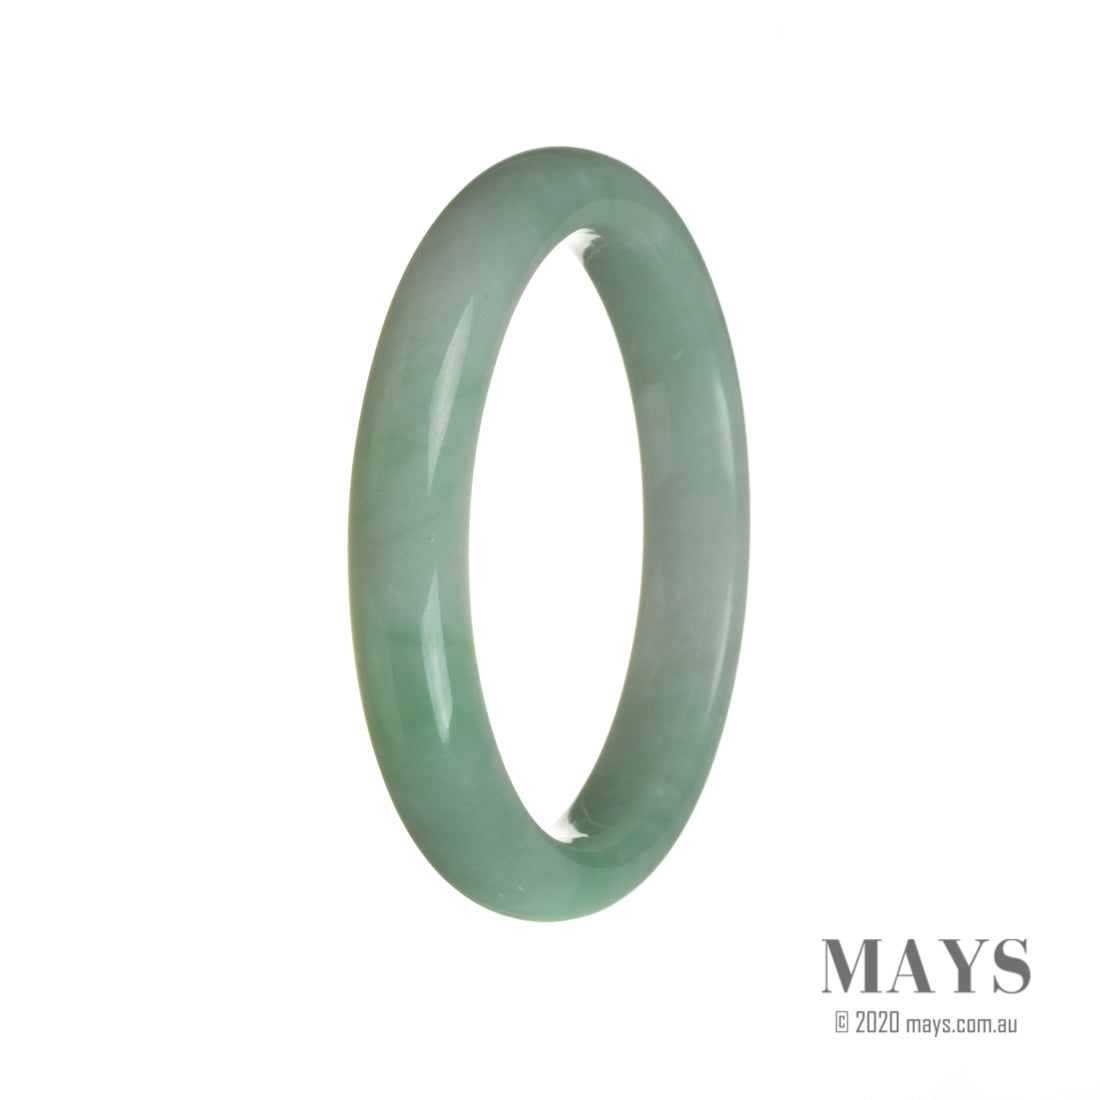 A green and white jadeite bangle with a half-moon shape, made from genuine Grade A jade.